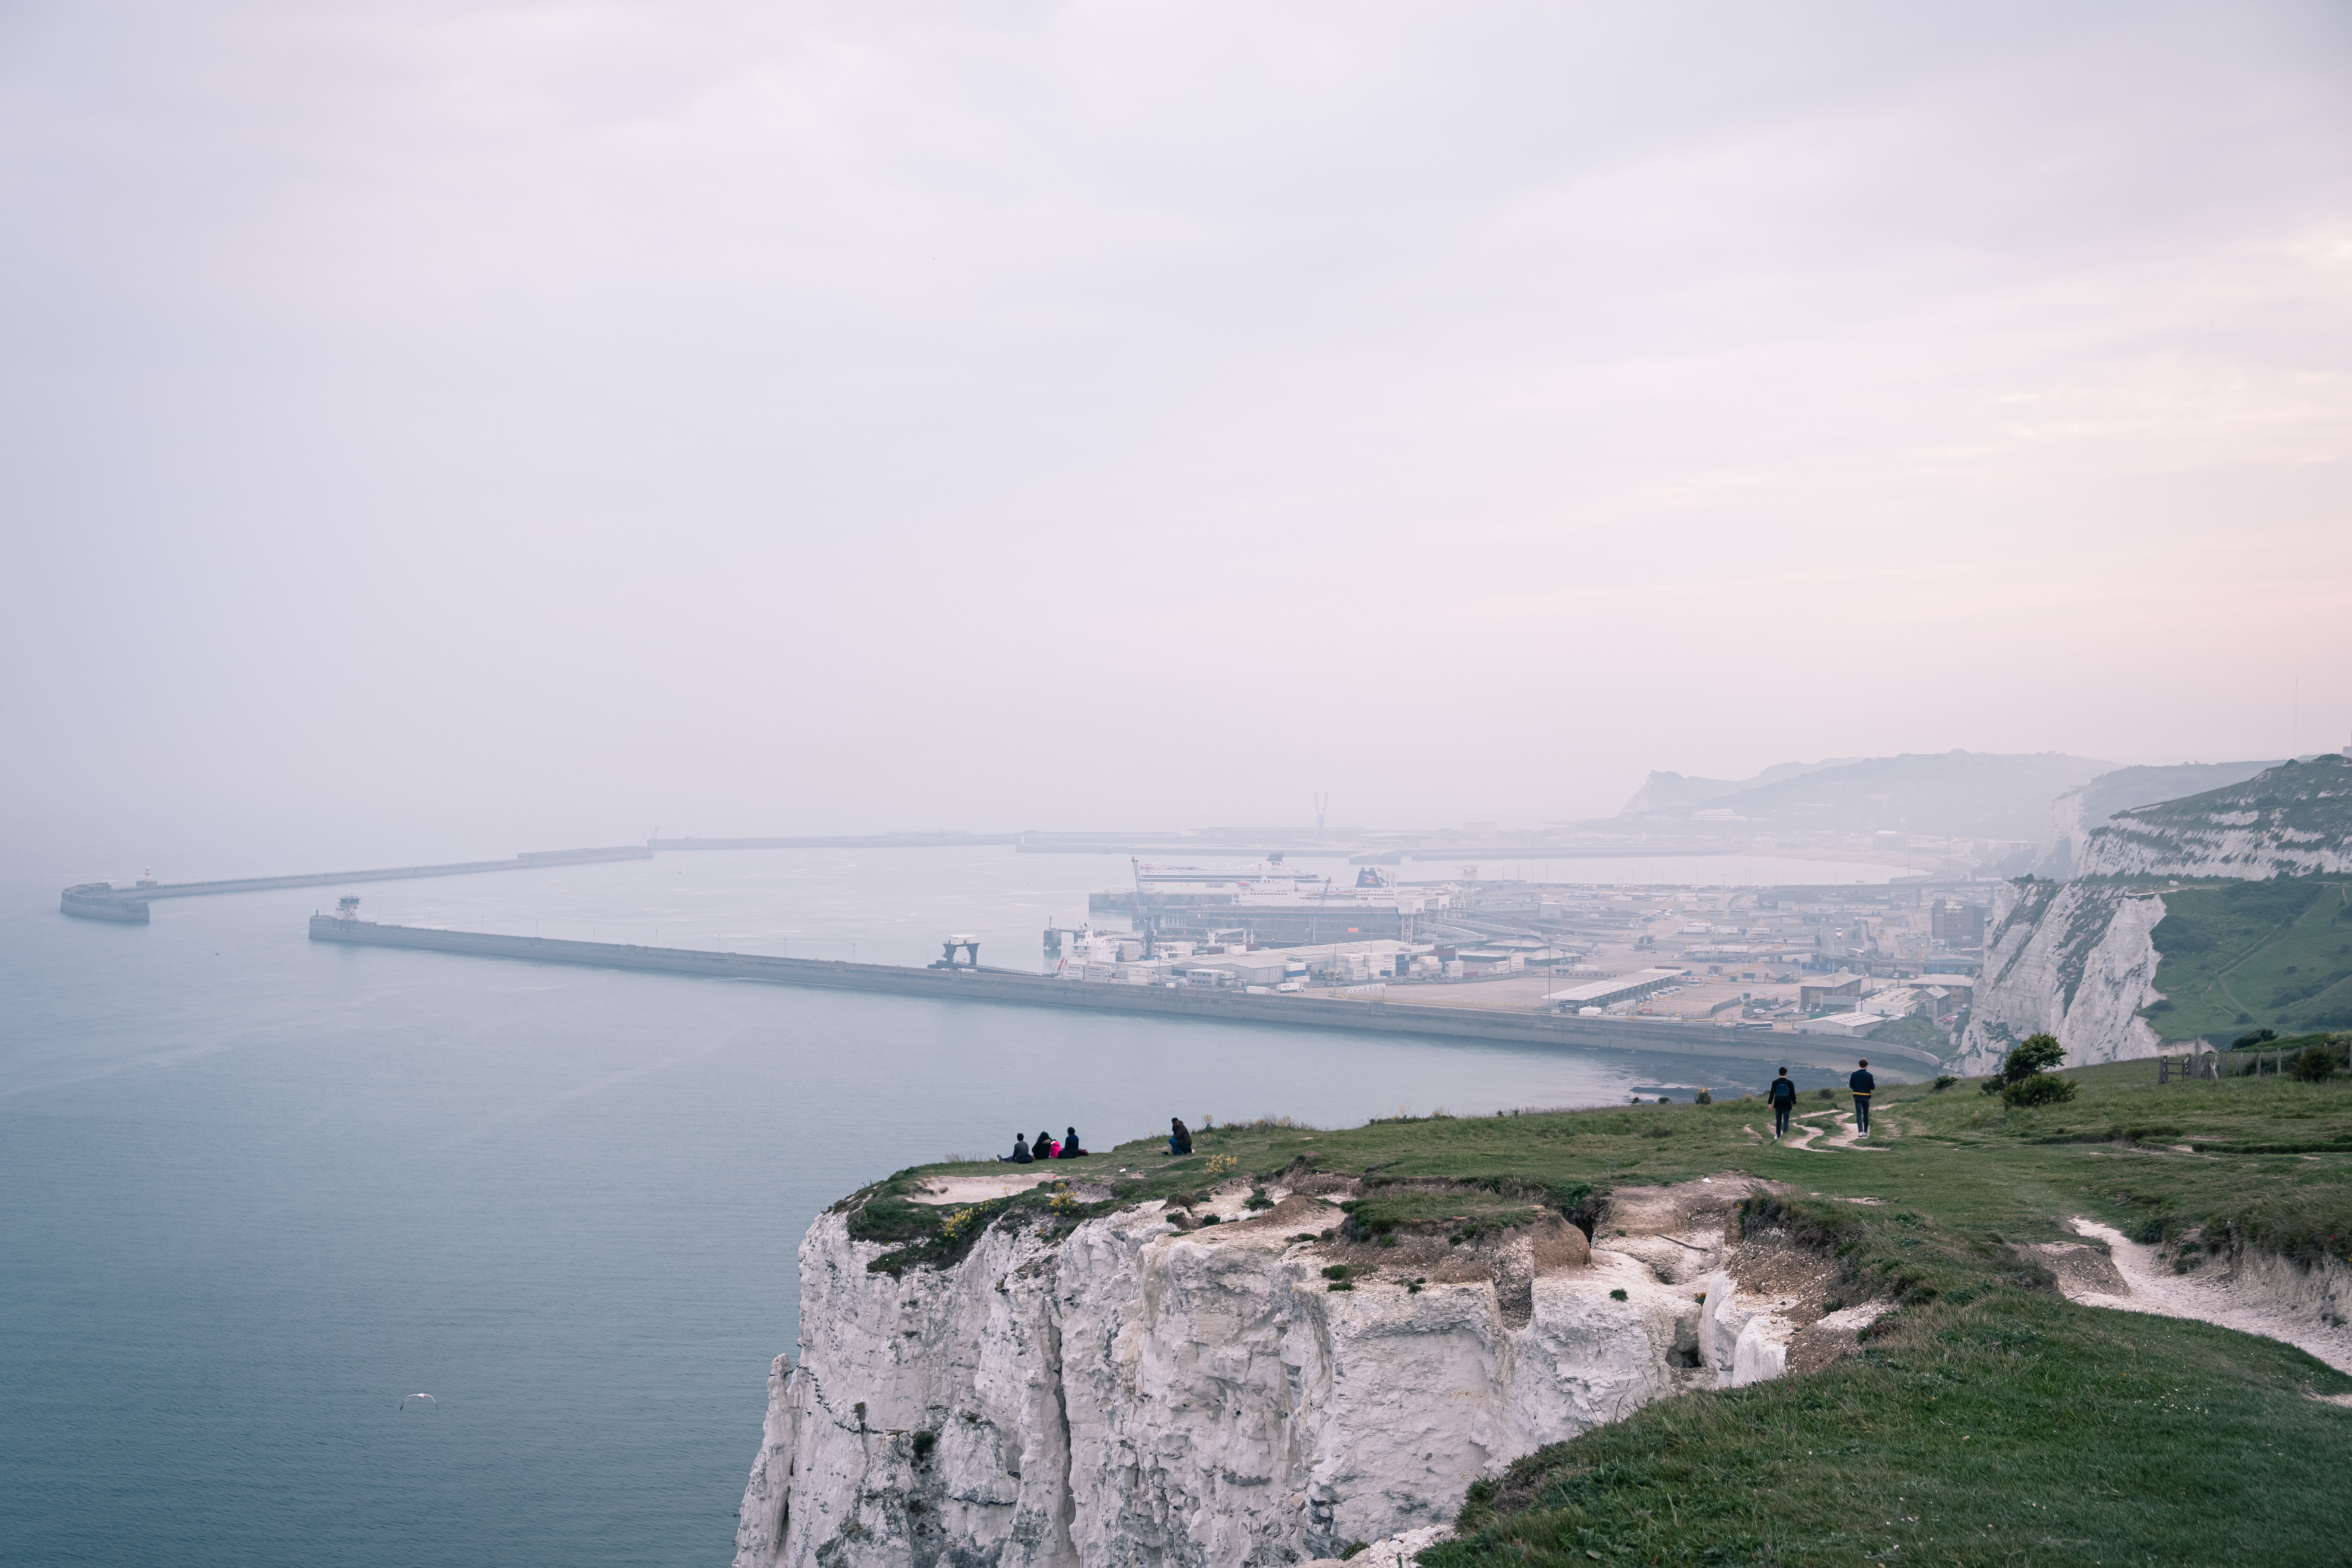 View of the Port of Dover from the cliffs